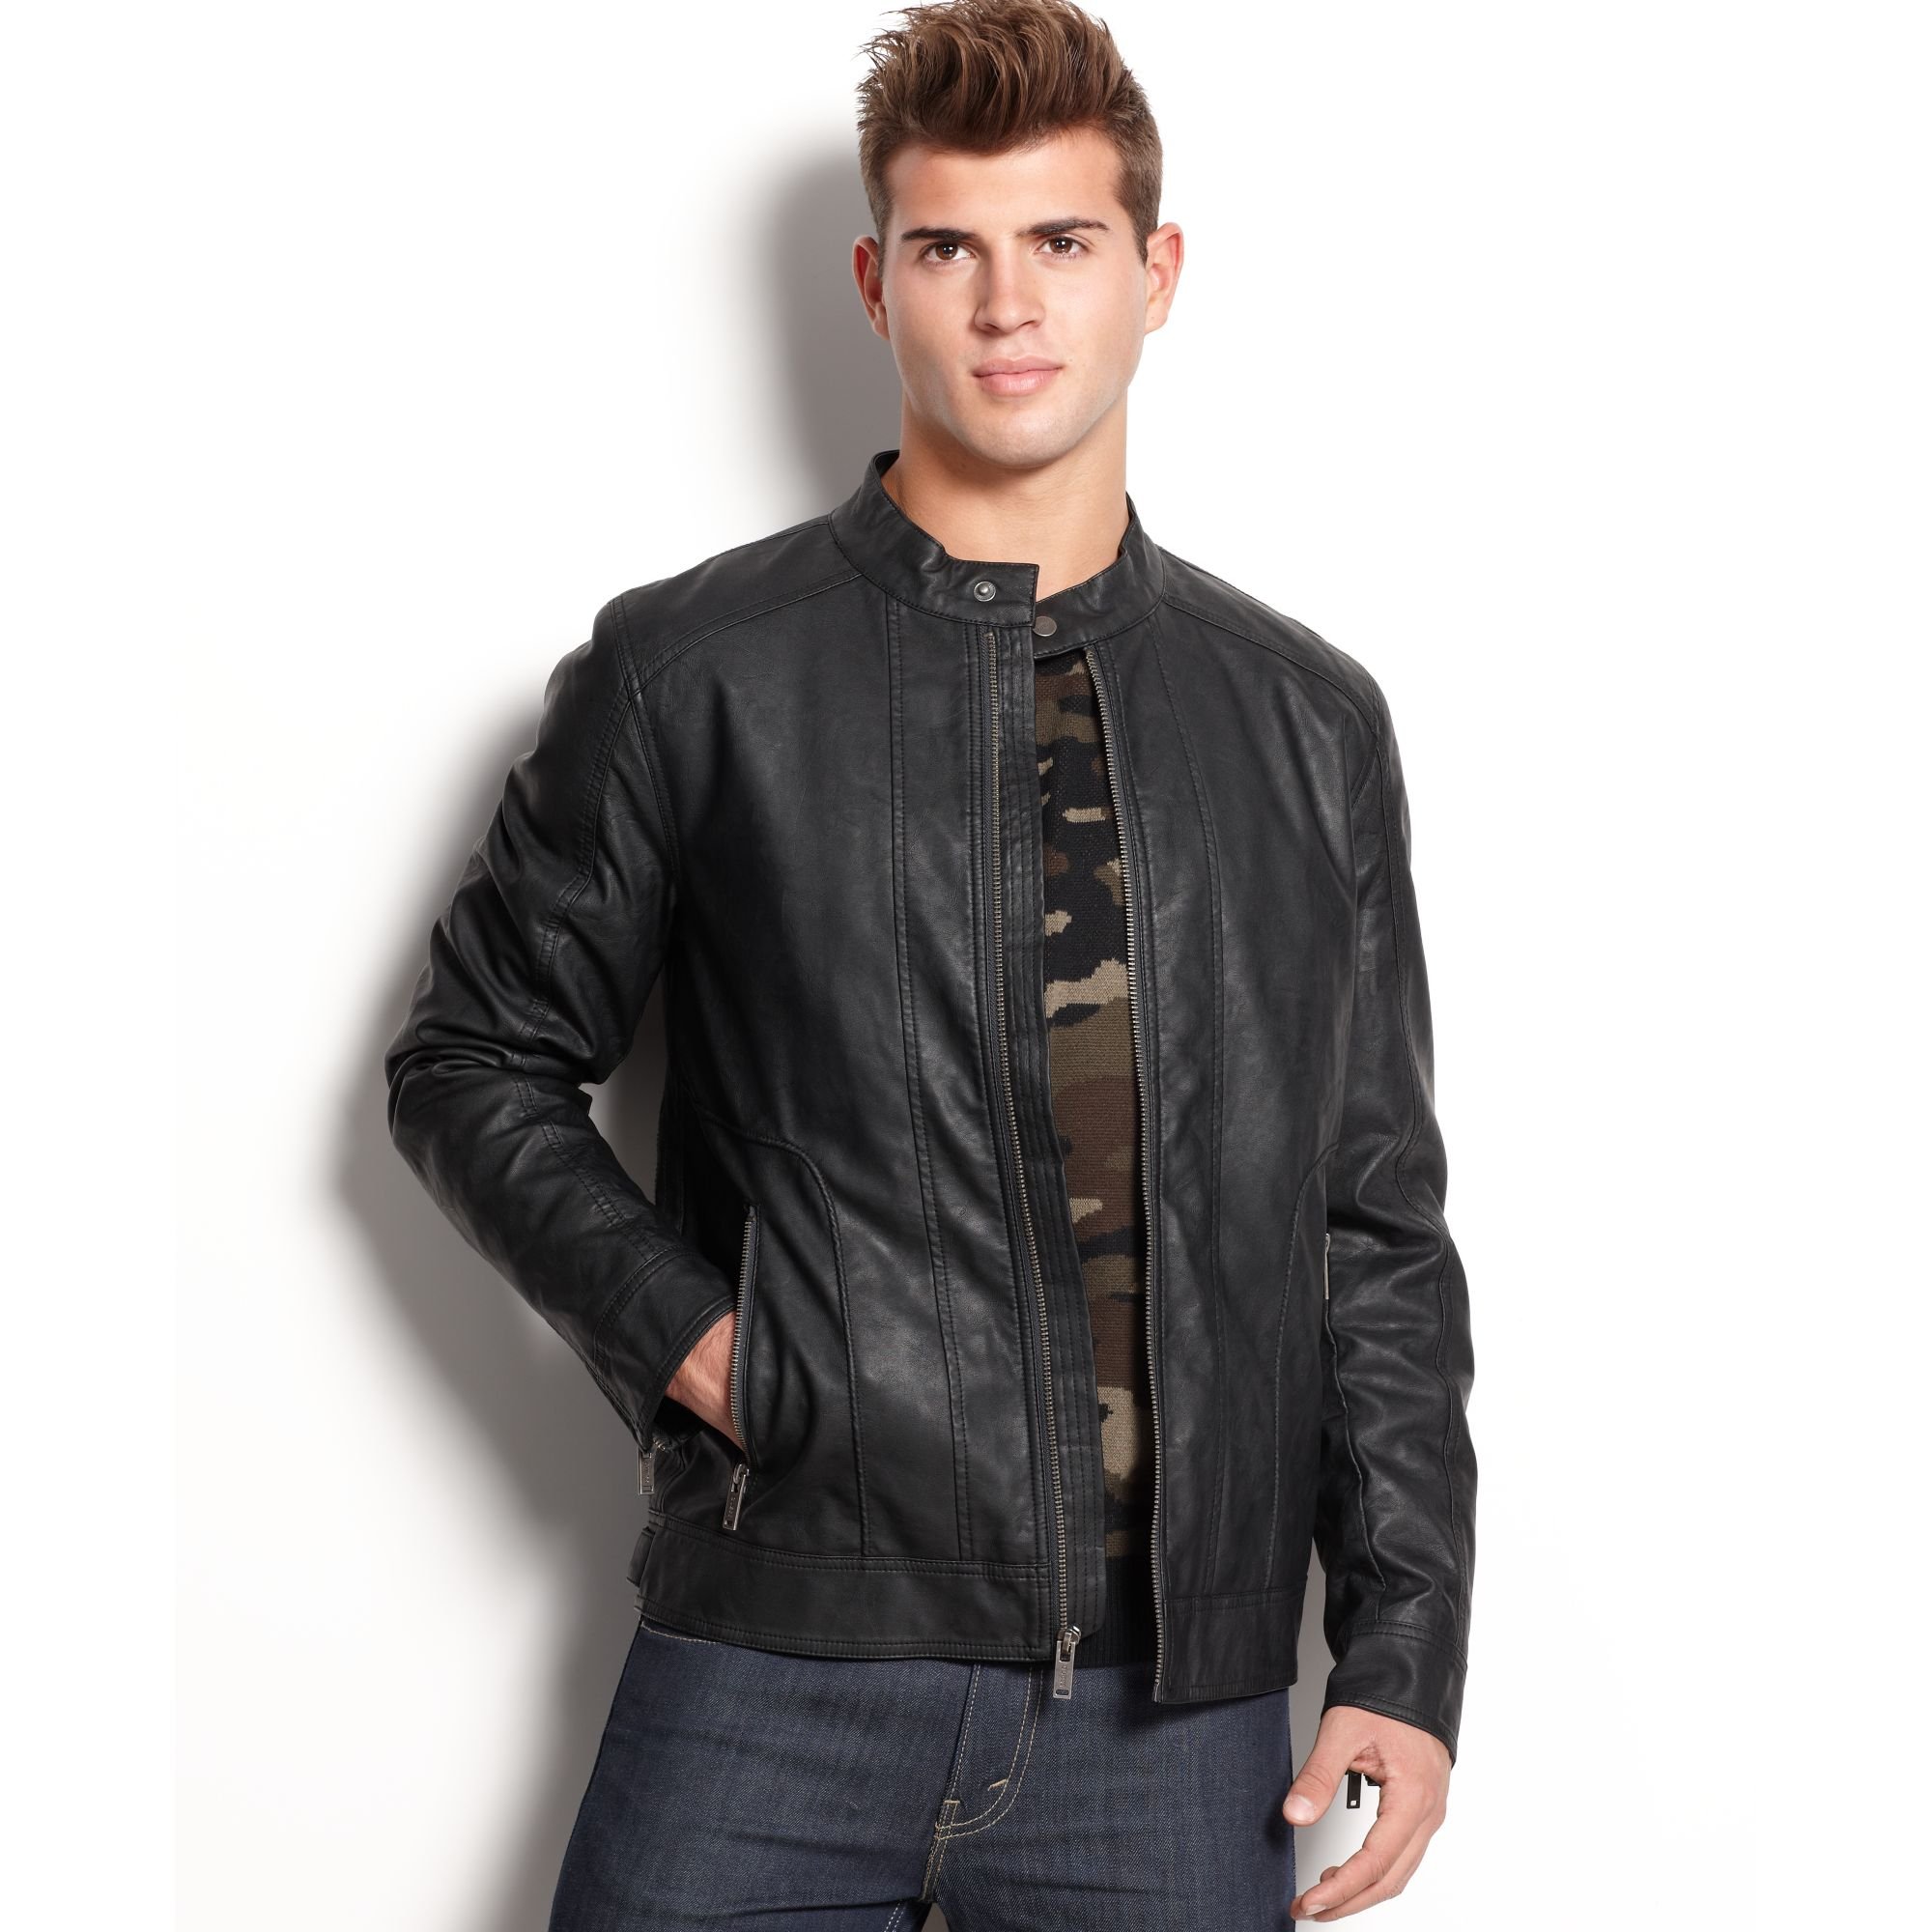 guess men's jacket leather